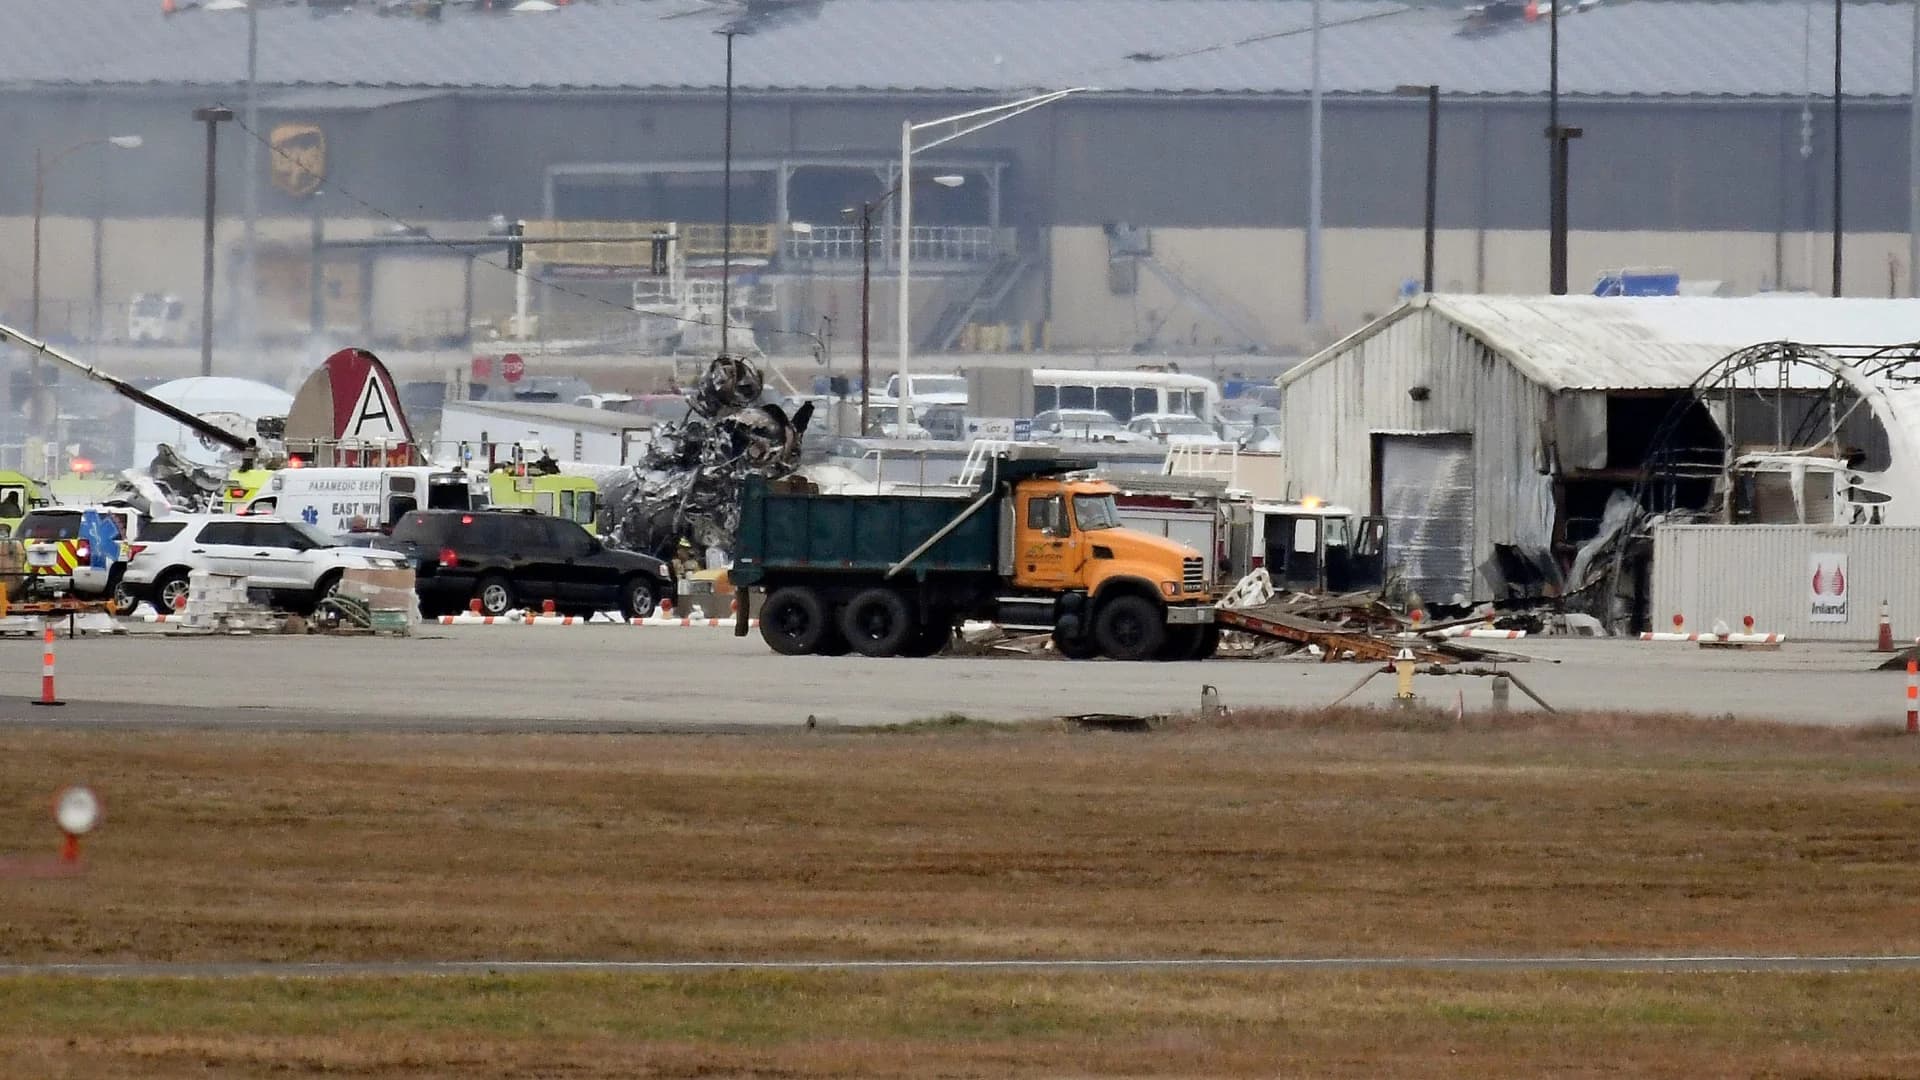 Officials: Multiple fatalities, injuries in WWII-era plane crash at Bradley Airport